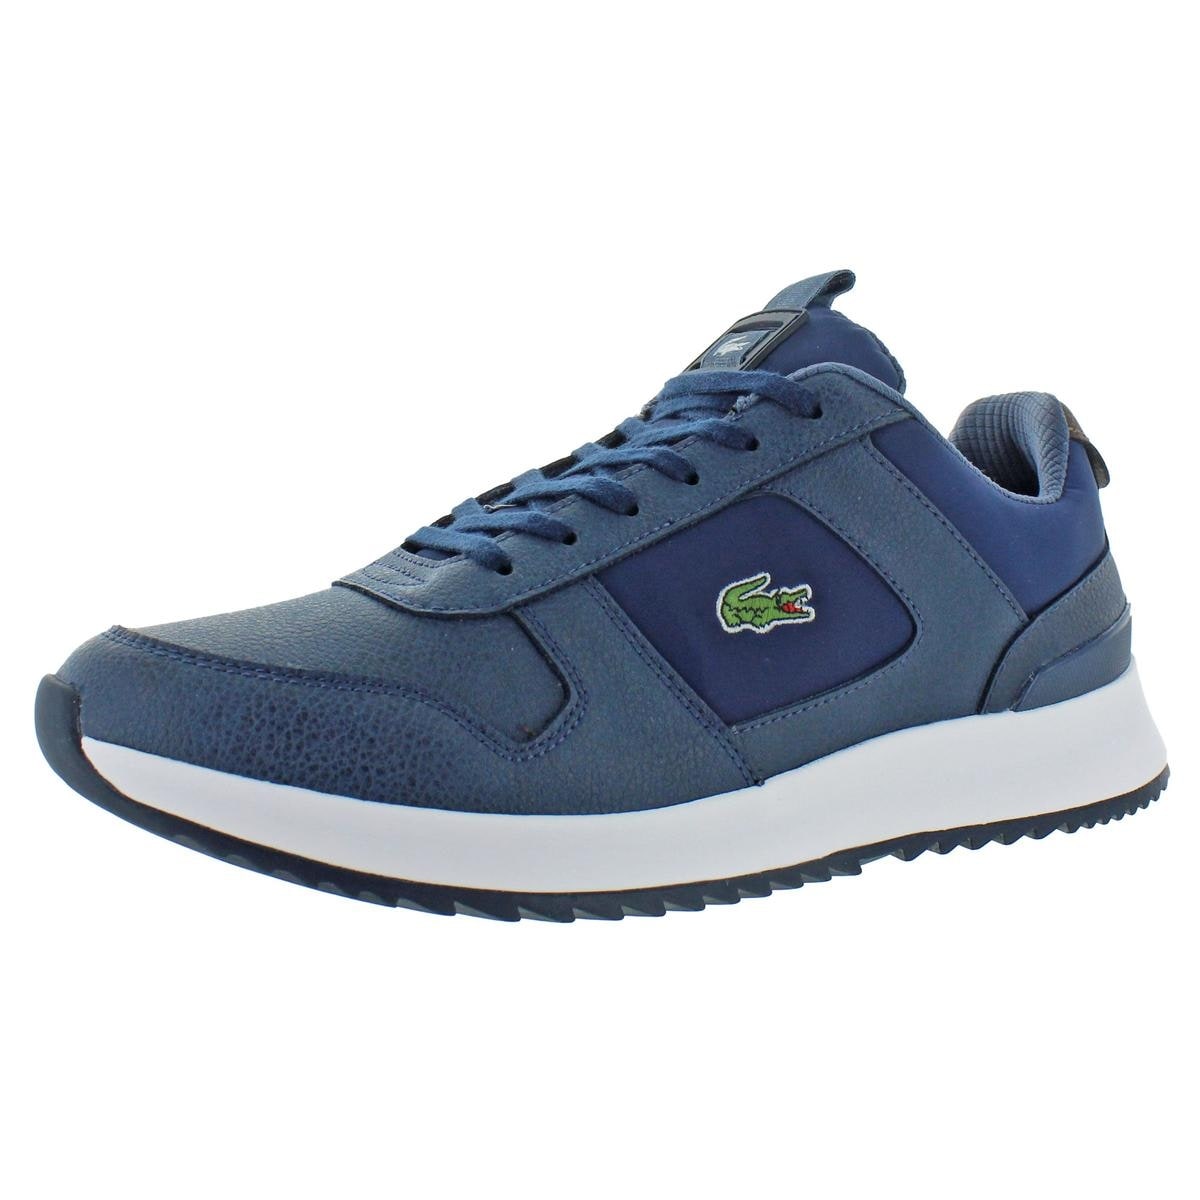 lacoste water shoes